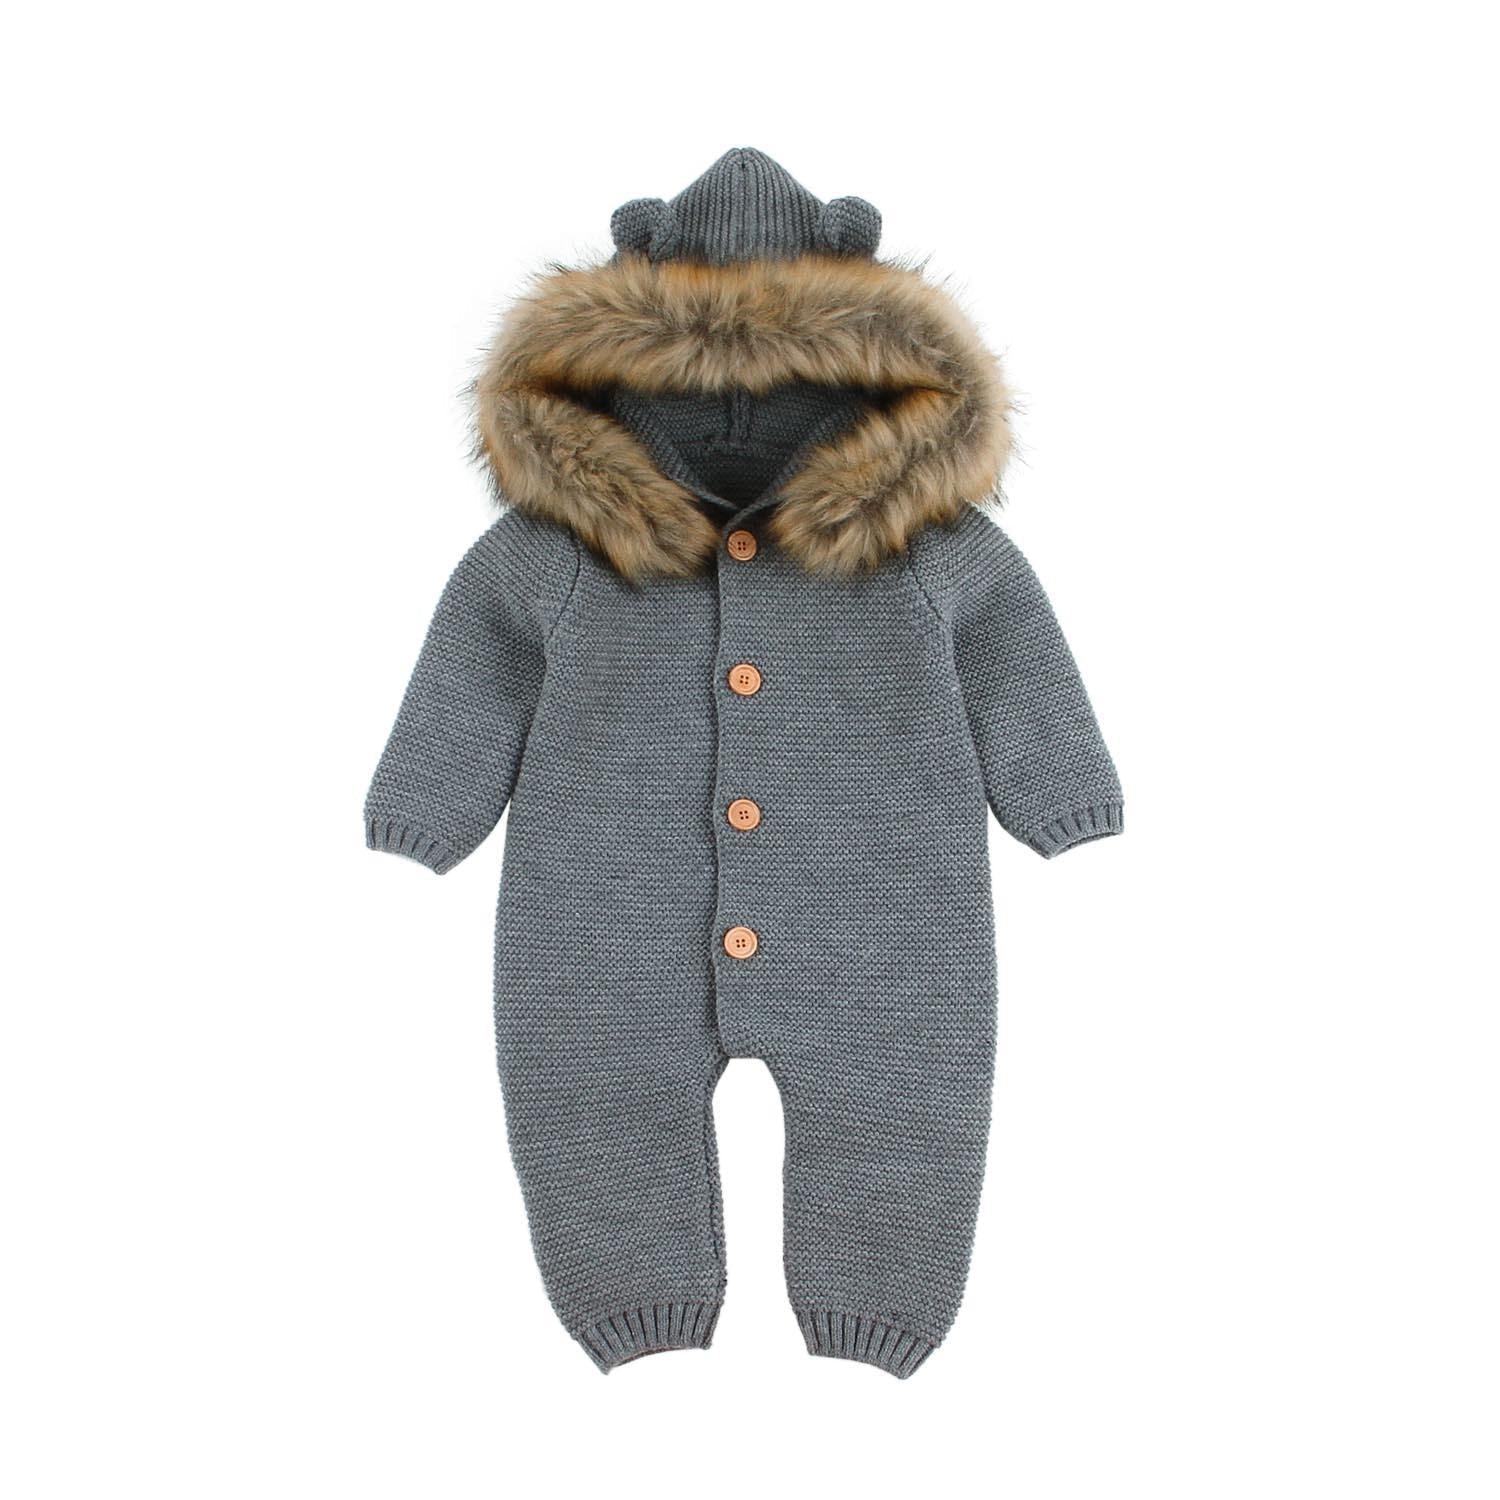 Authentic Winter Baby Romper Authentic Winter Baby Romper Baby Bubble Store Grey 3M 